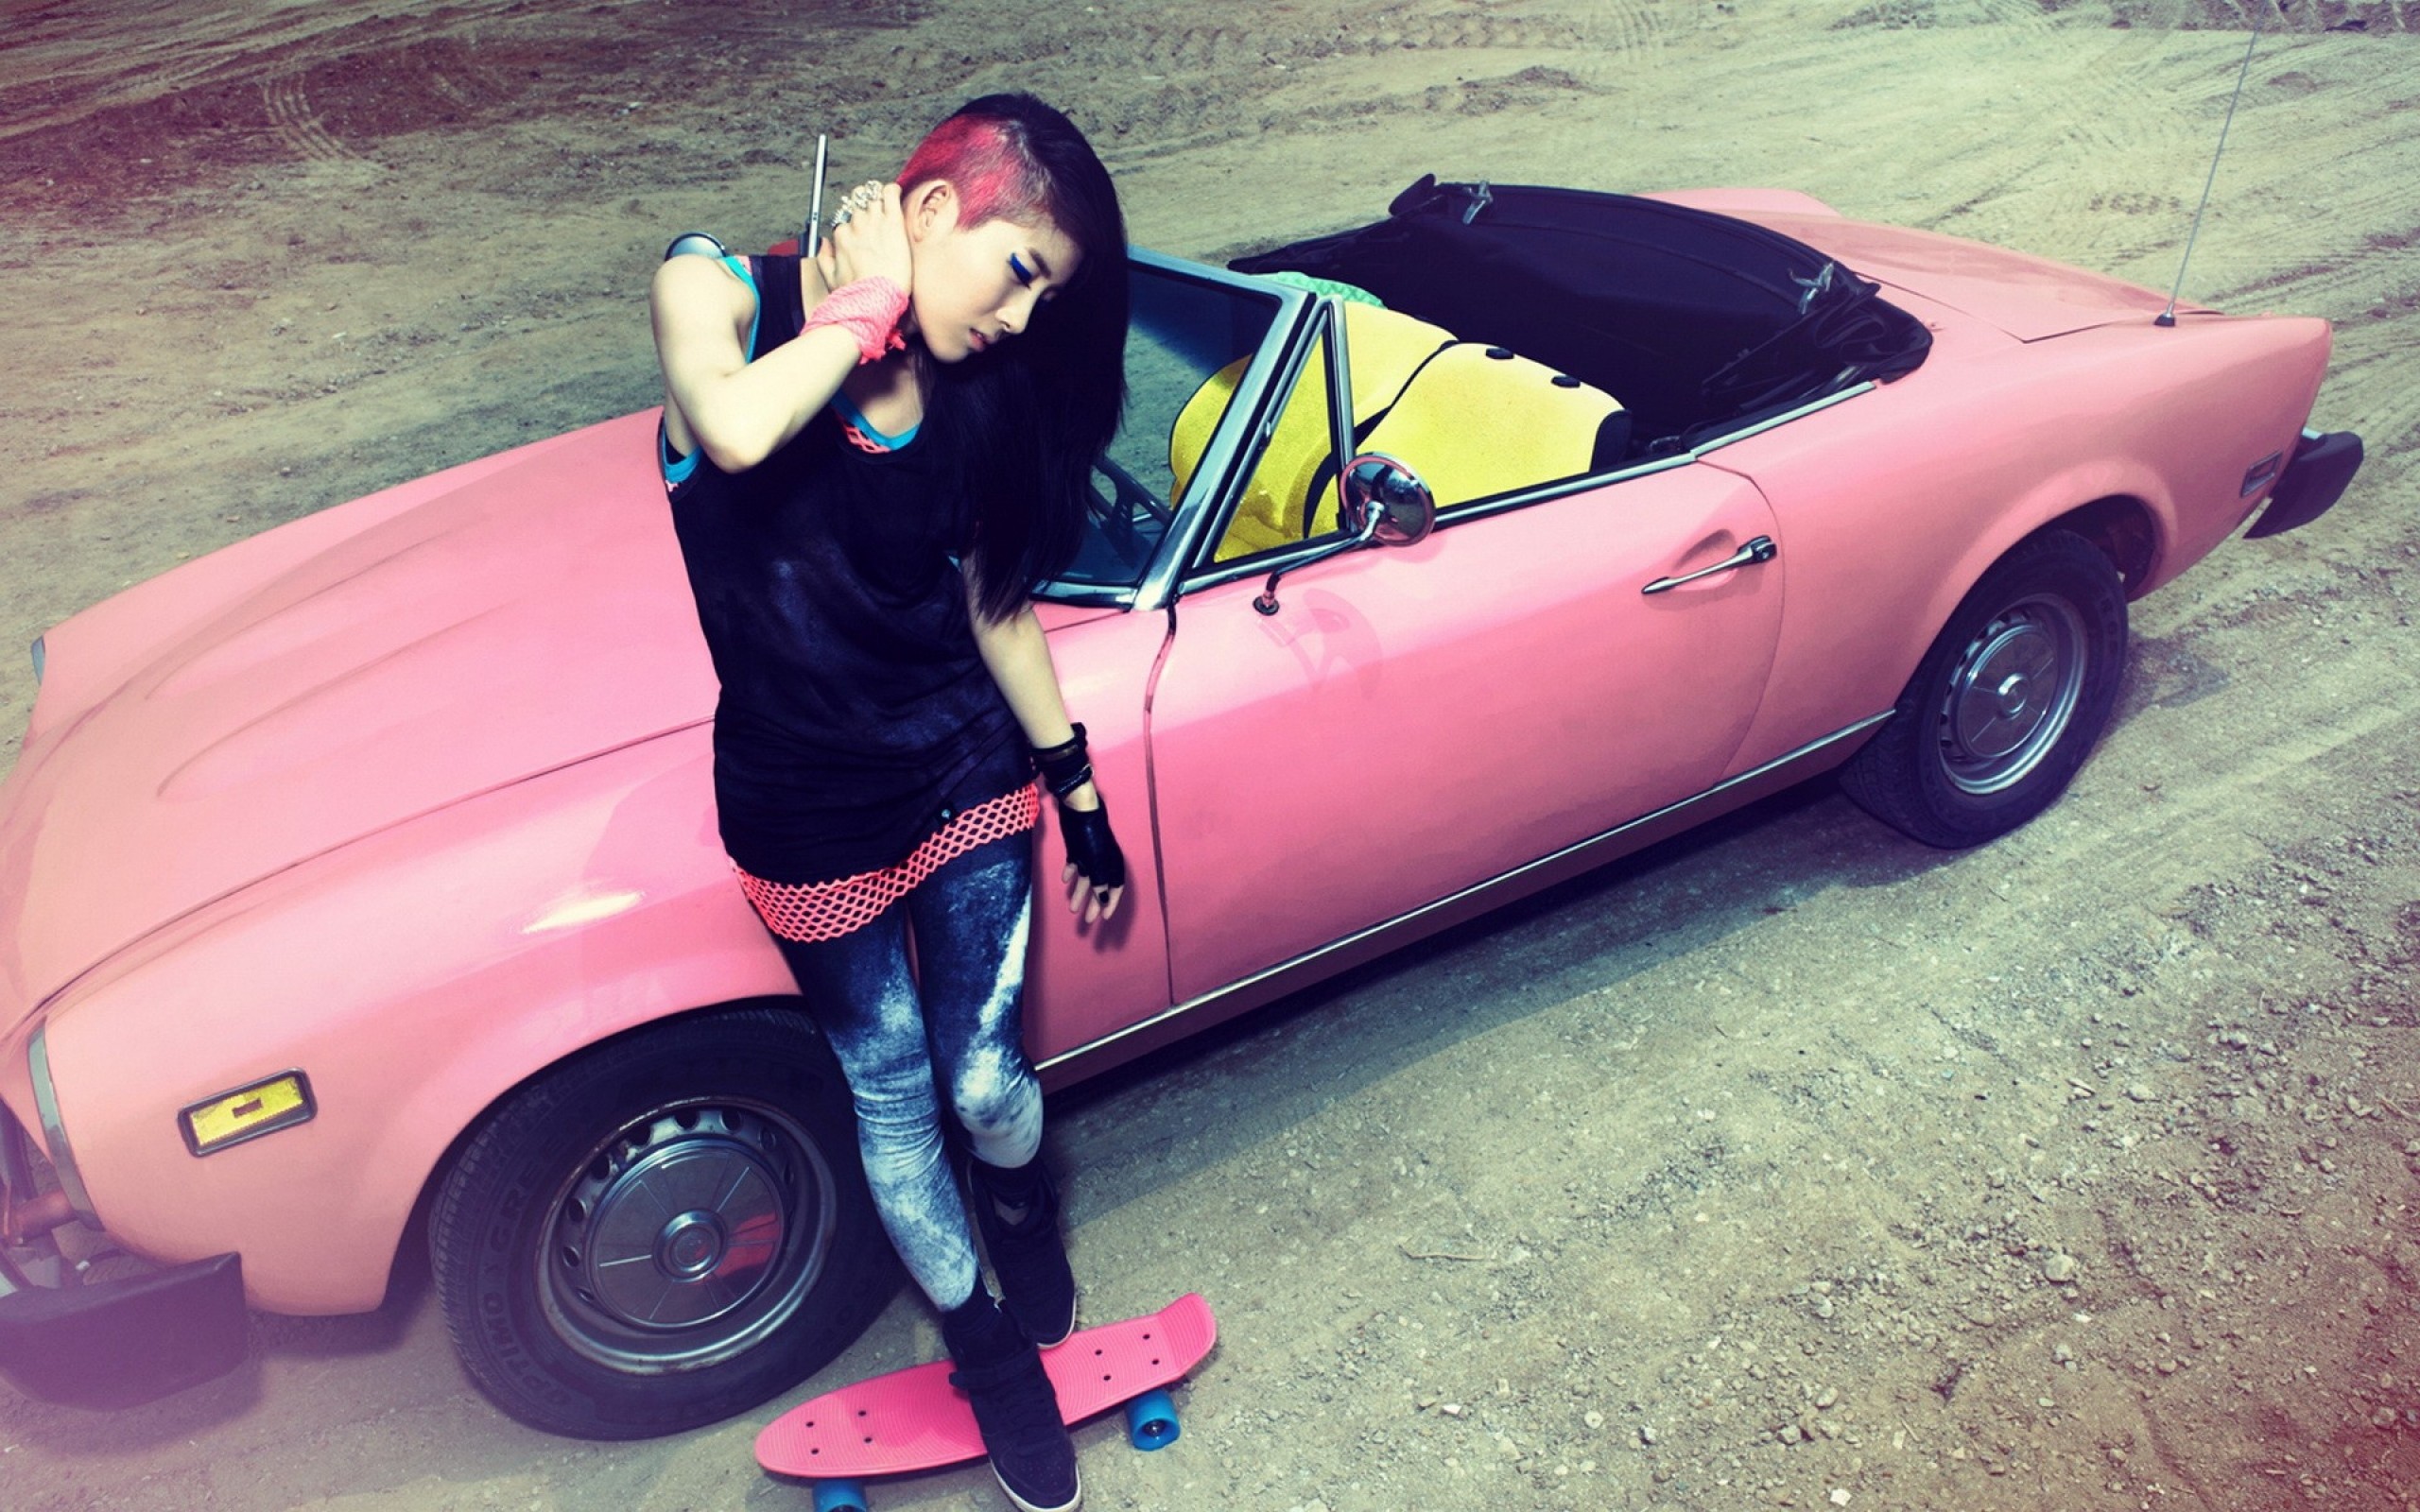 2560x1600 A girl and a pink car, swag wallpapers and images